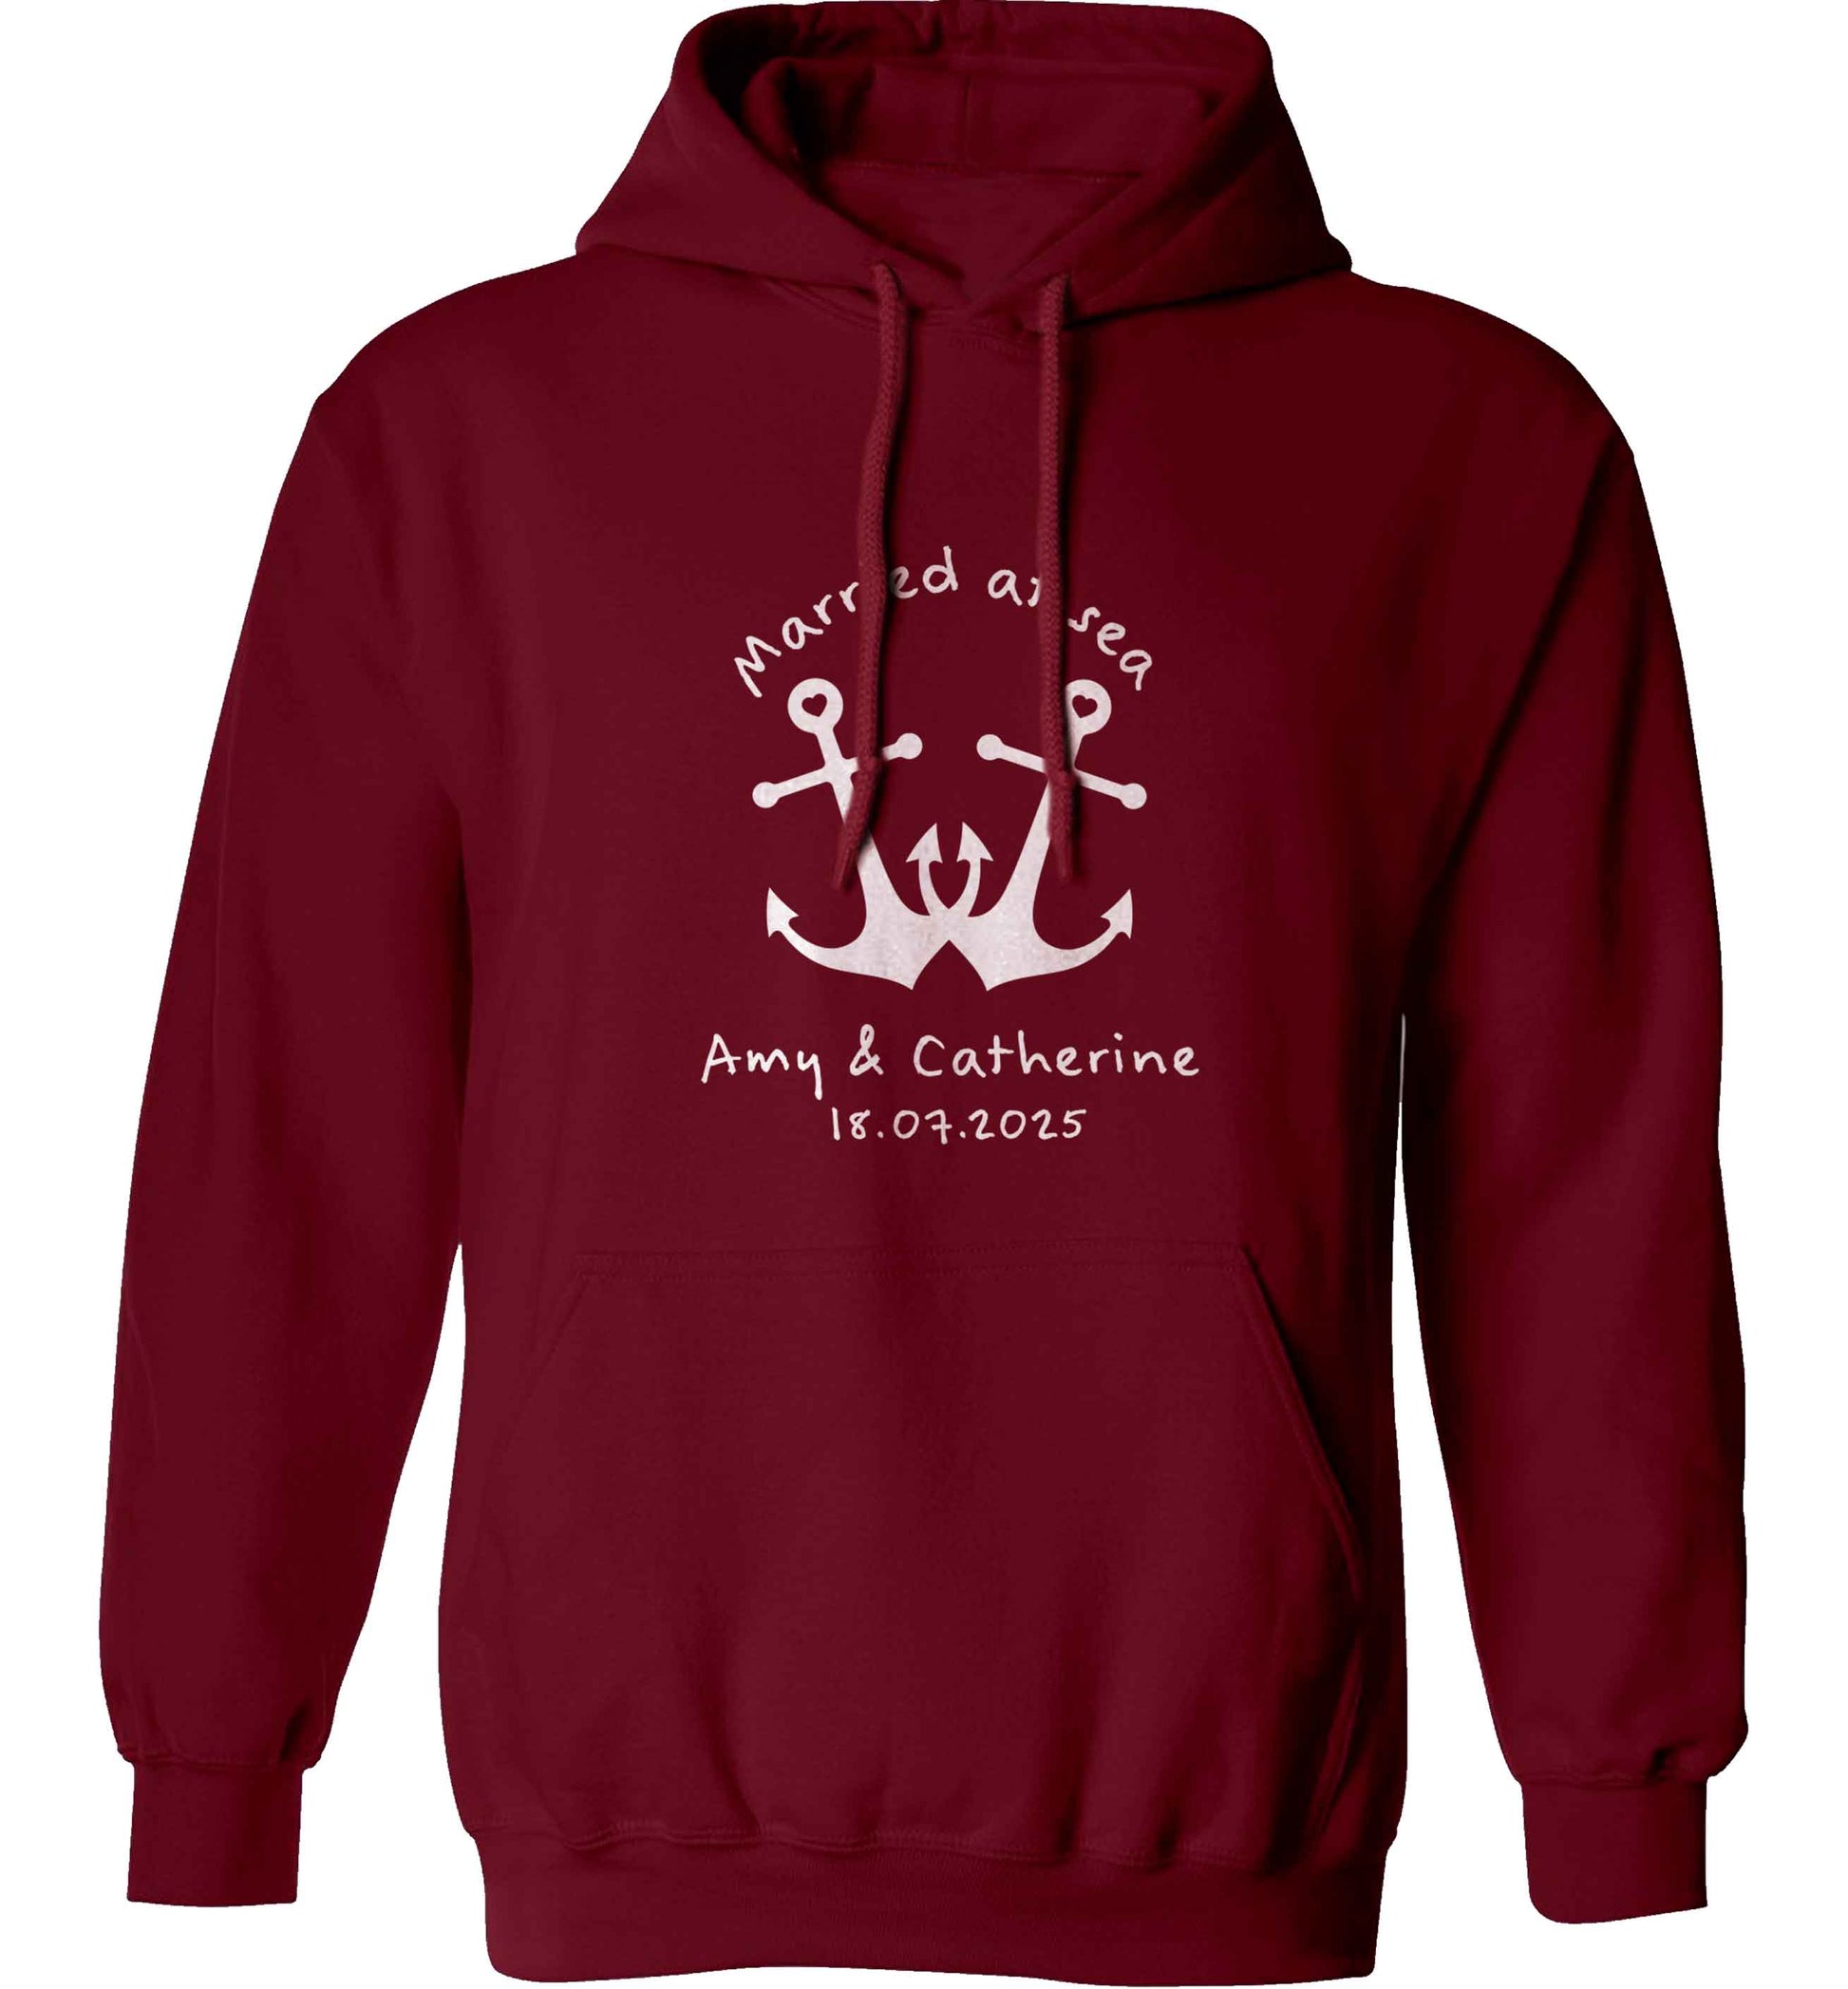 Married at sea pink anchors adults unisex maroon hoodie 2XL